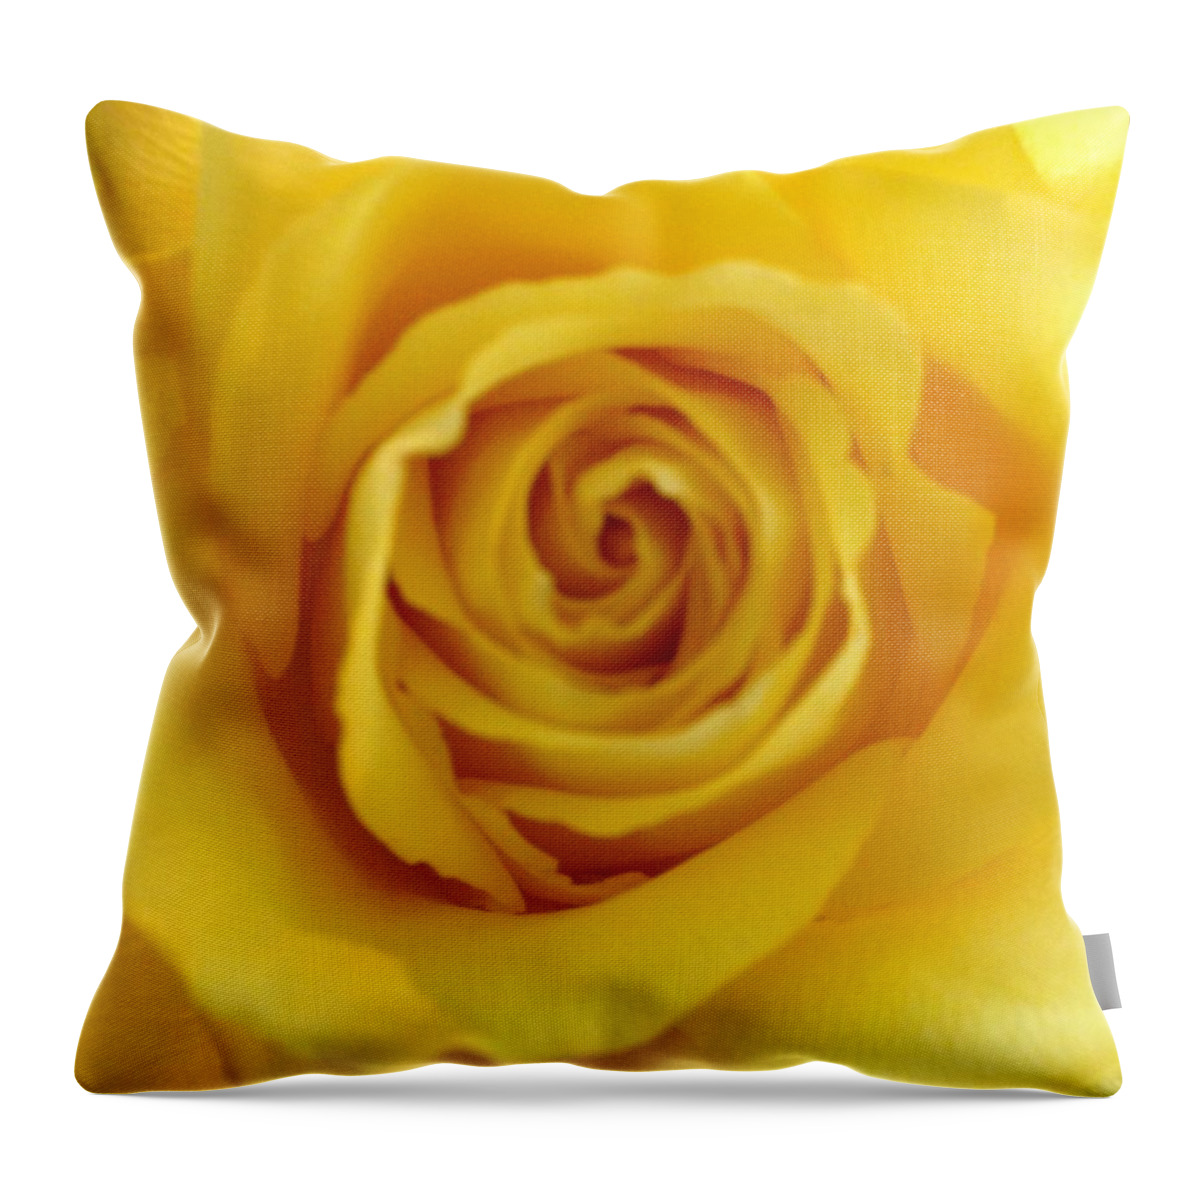 Rose Throw Pillow featuring the photograph Yellow Petals by Marian Lonzetta